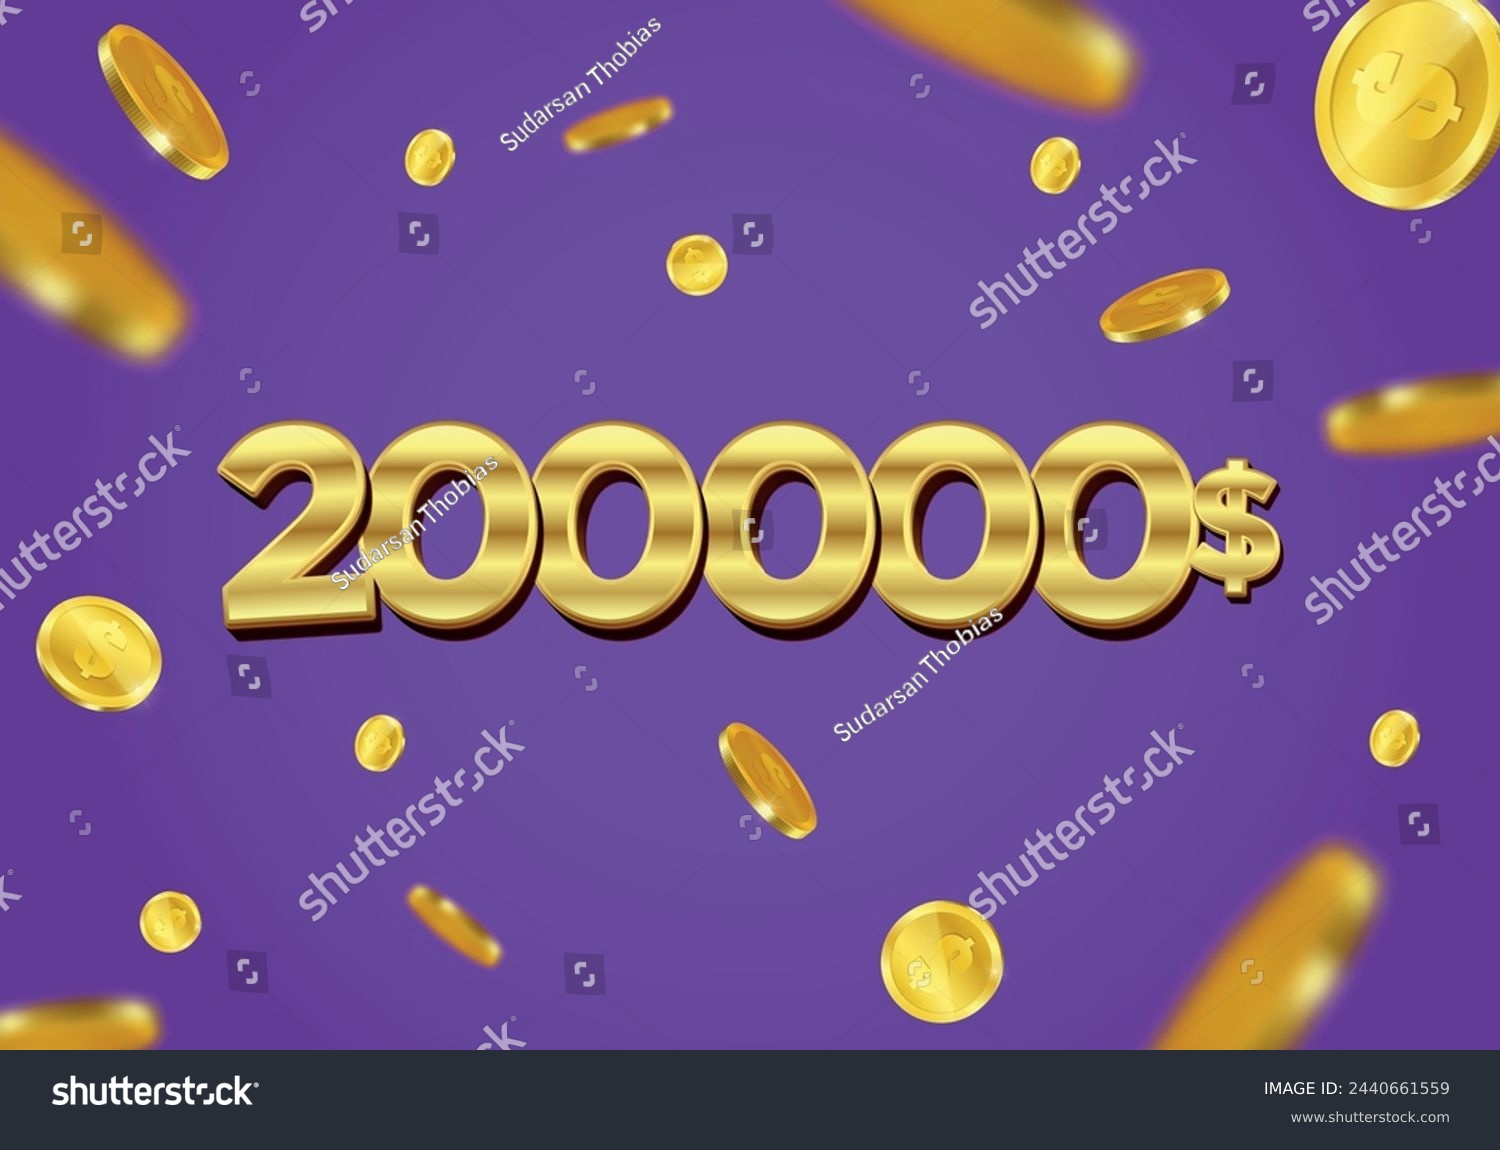 SVG of 200000 Dollar gift or offer poster with flying gold coins. Two hundred thousand or Two lakh Dollars coupon voucher, cash back banner special offer, casino winner. Vector illustration. svg